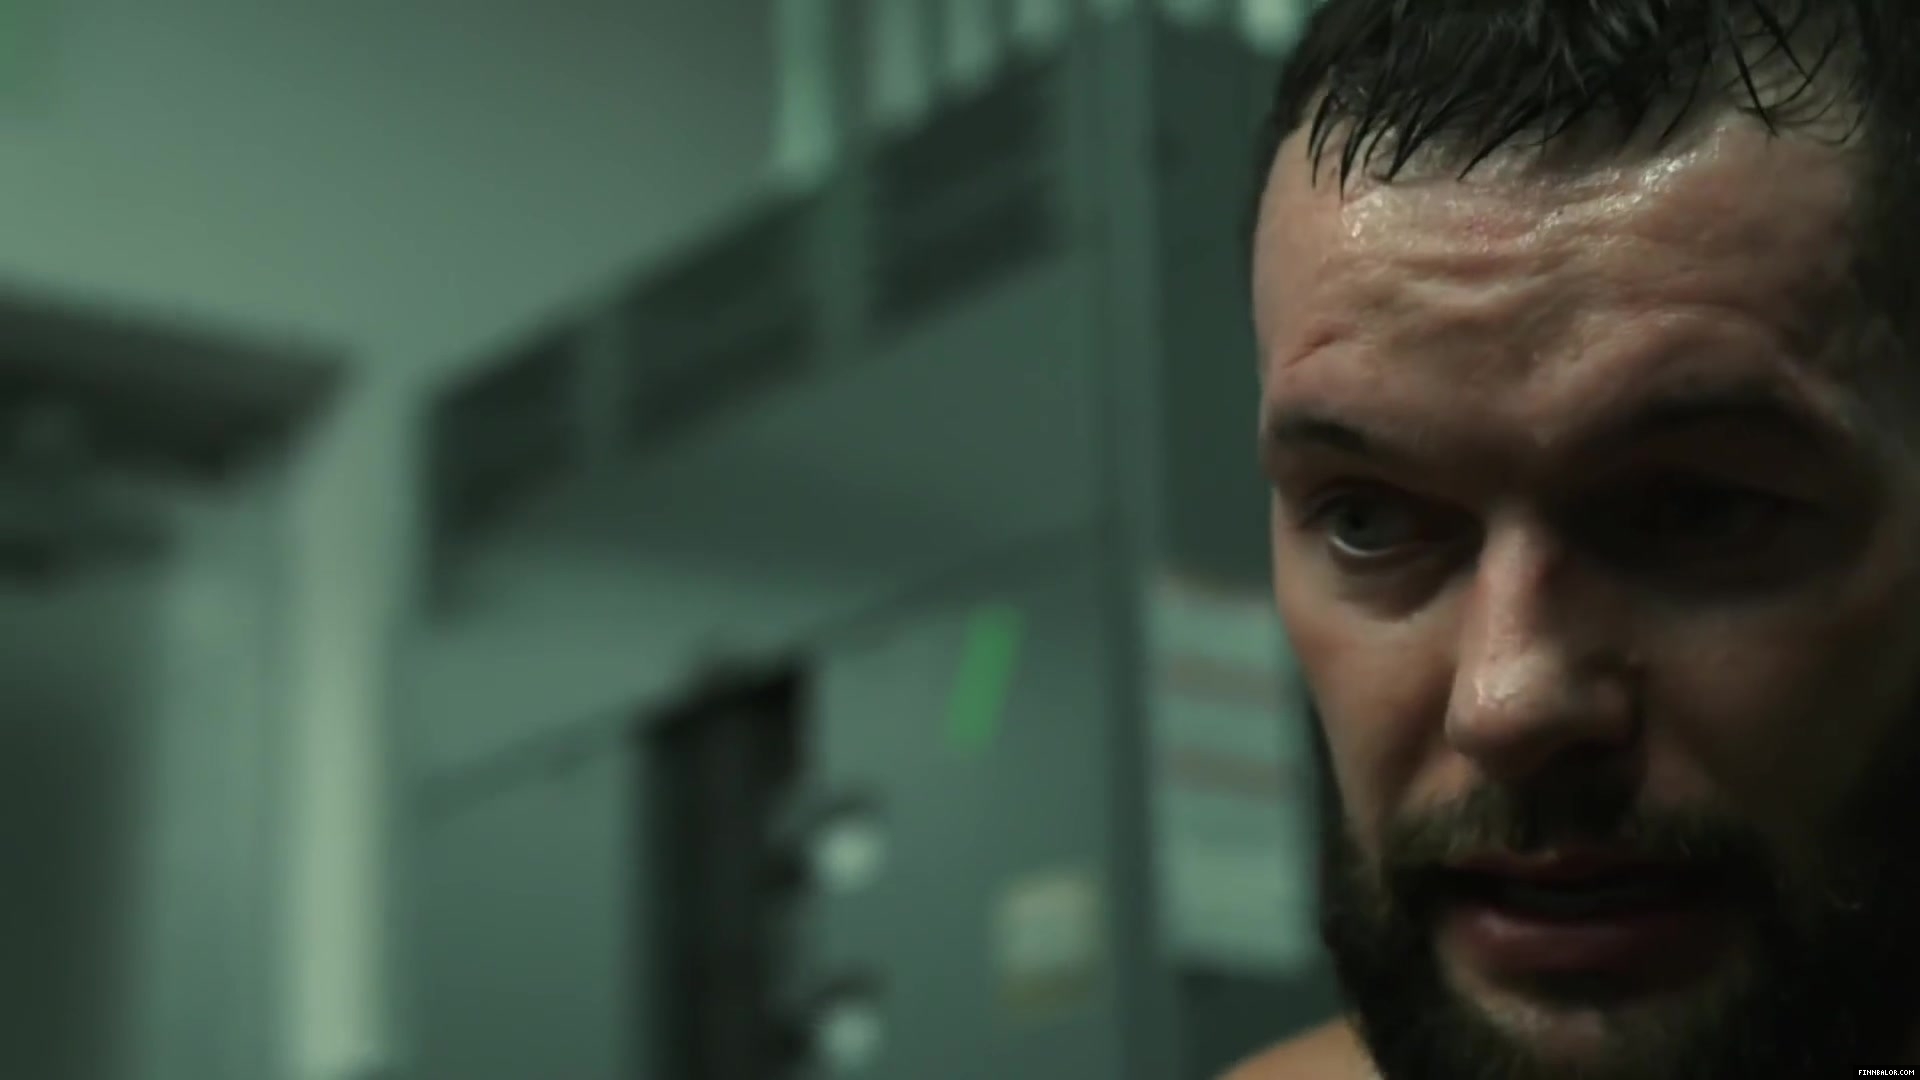 Finn_Balor___The_Rising_of_the_Prince_in_NXT_285.jpg